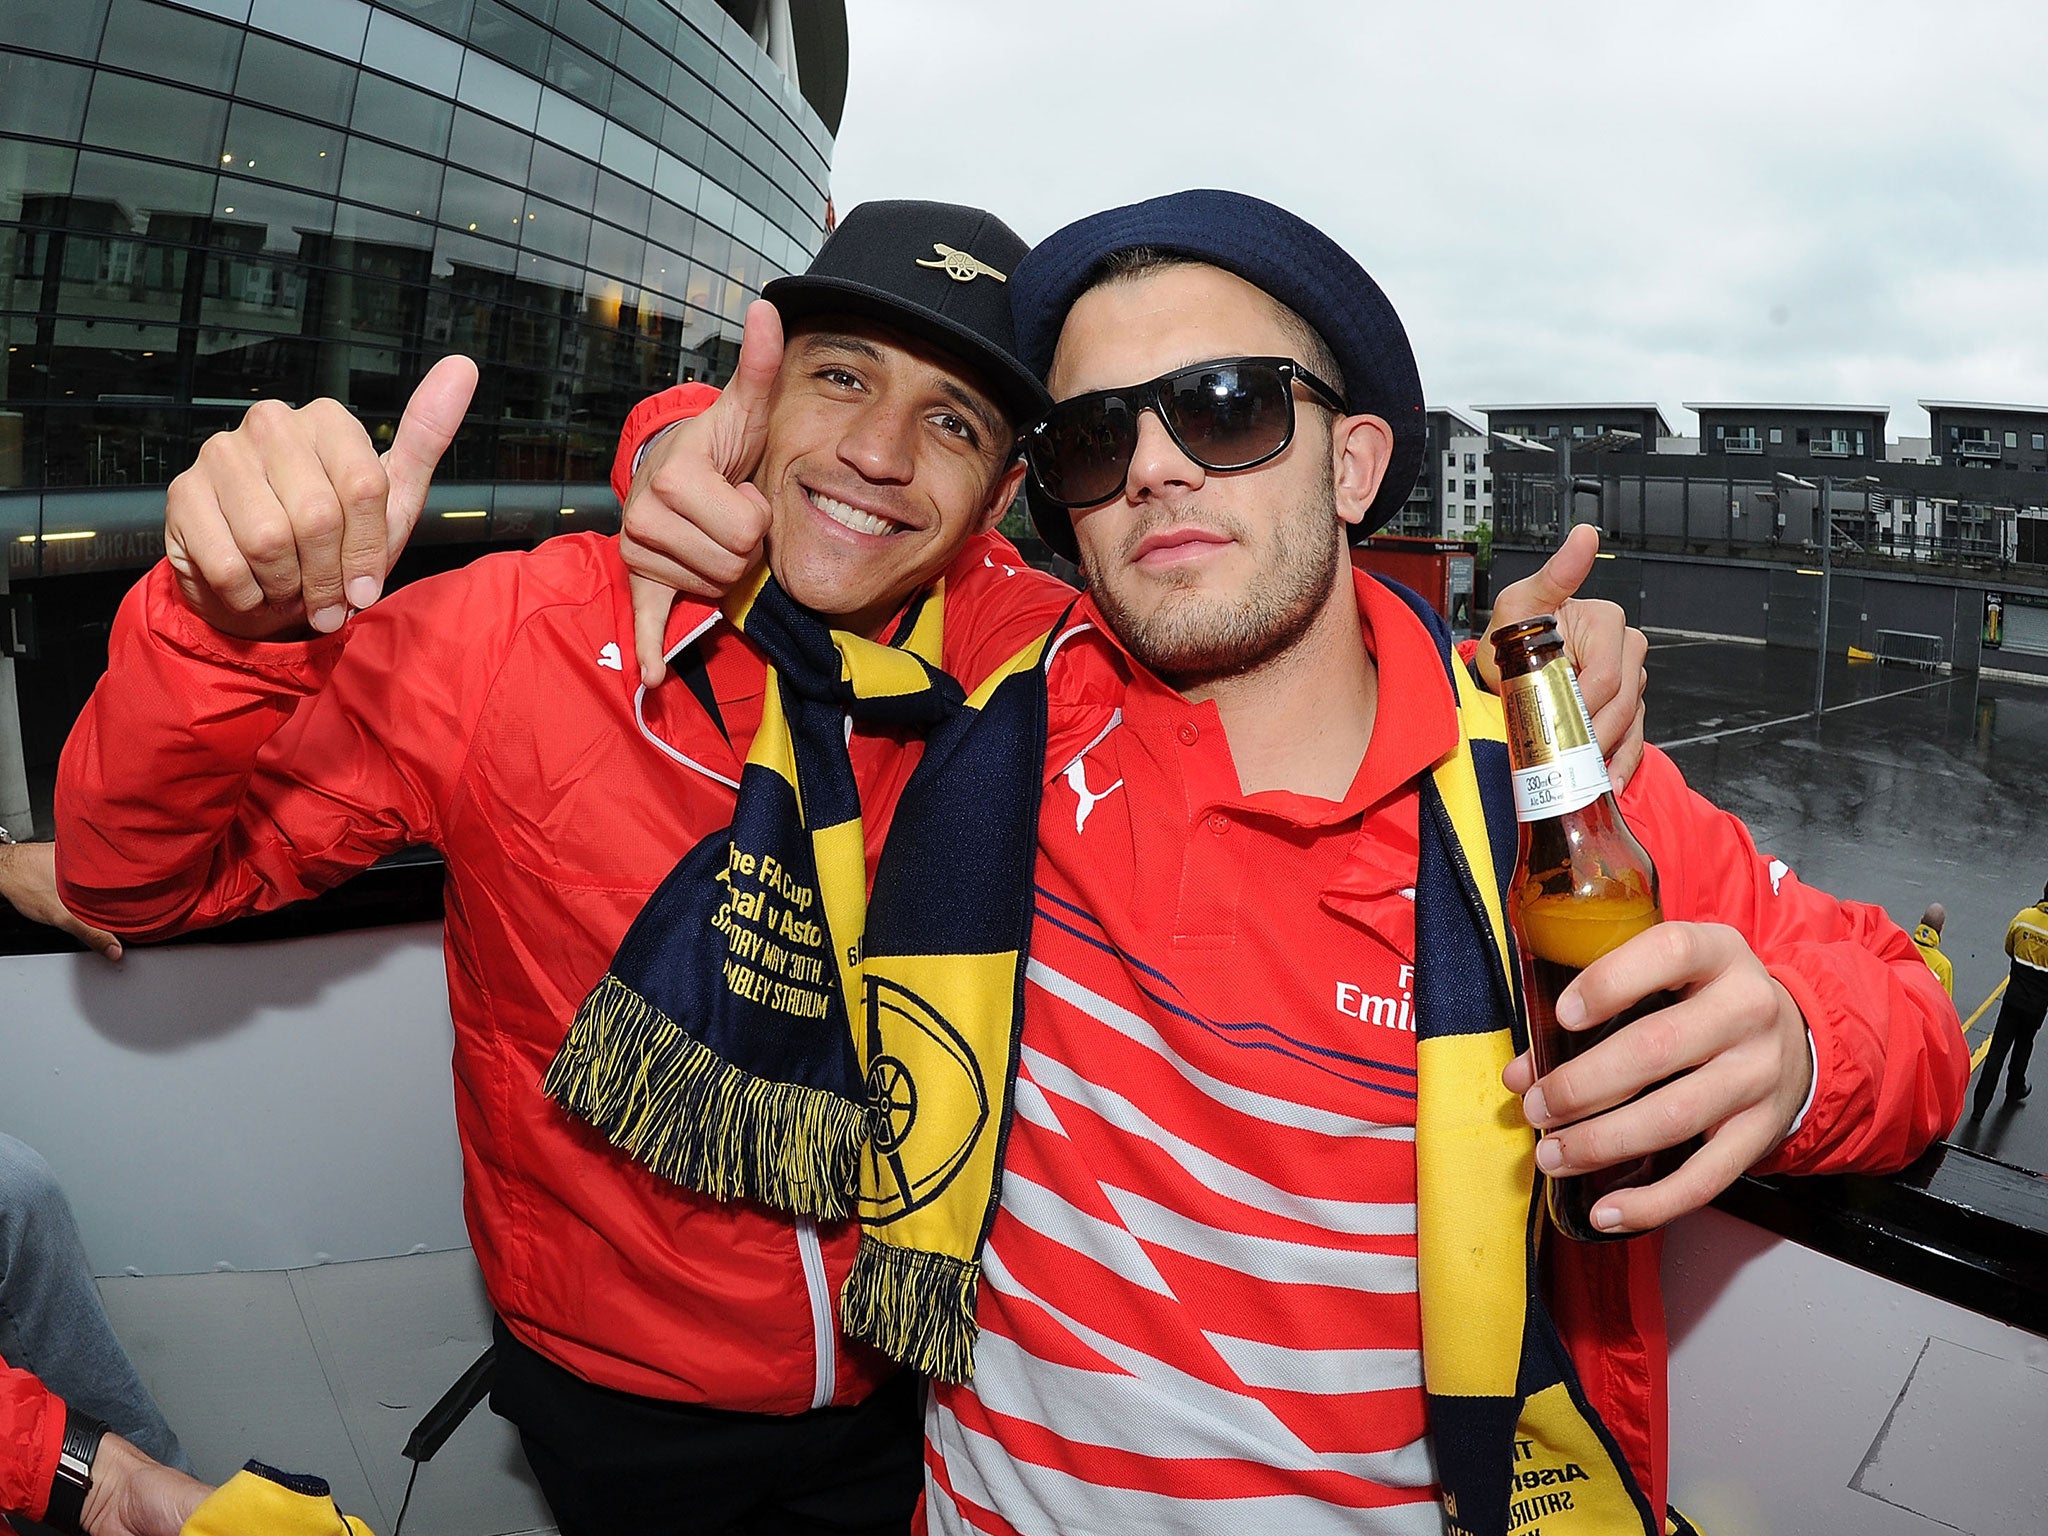 Jack Wilshere, right, on Arsenal’s victory parade, where he added to his long list of indiscretions